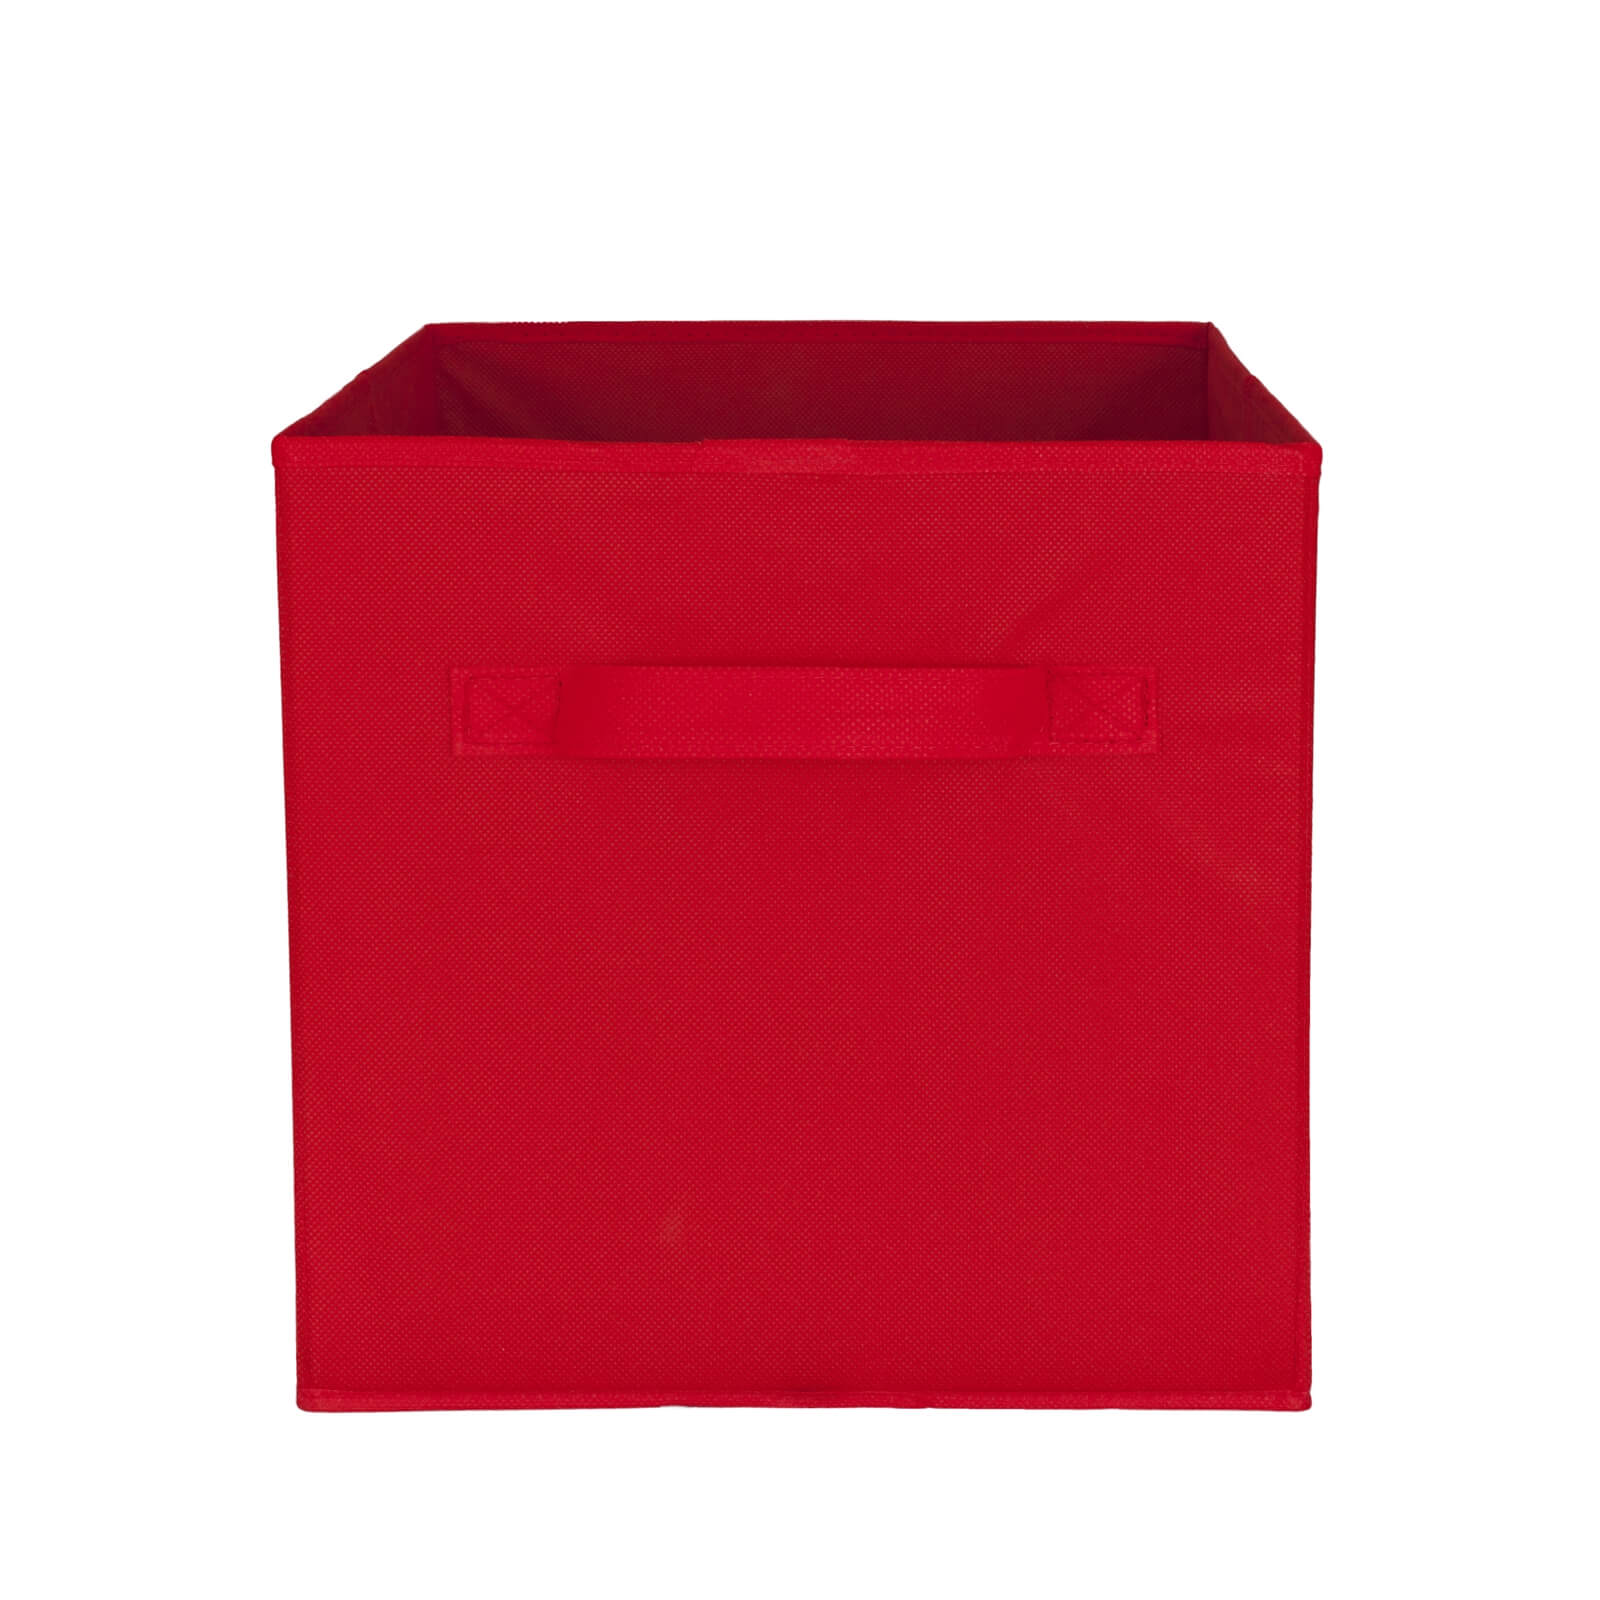 Photo of Compact Cube Fabric Insert - Red